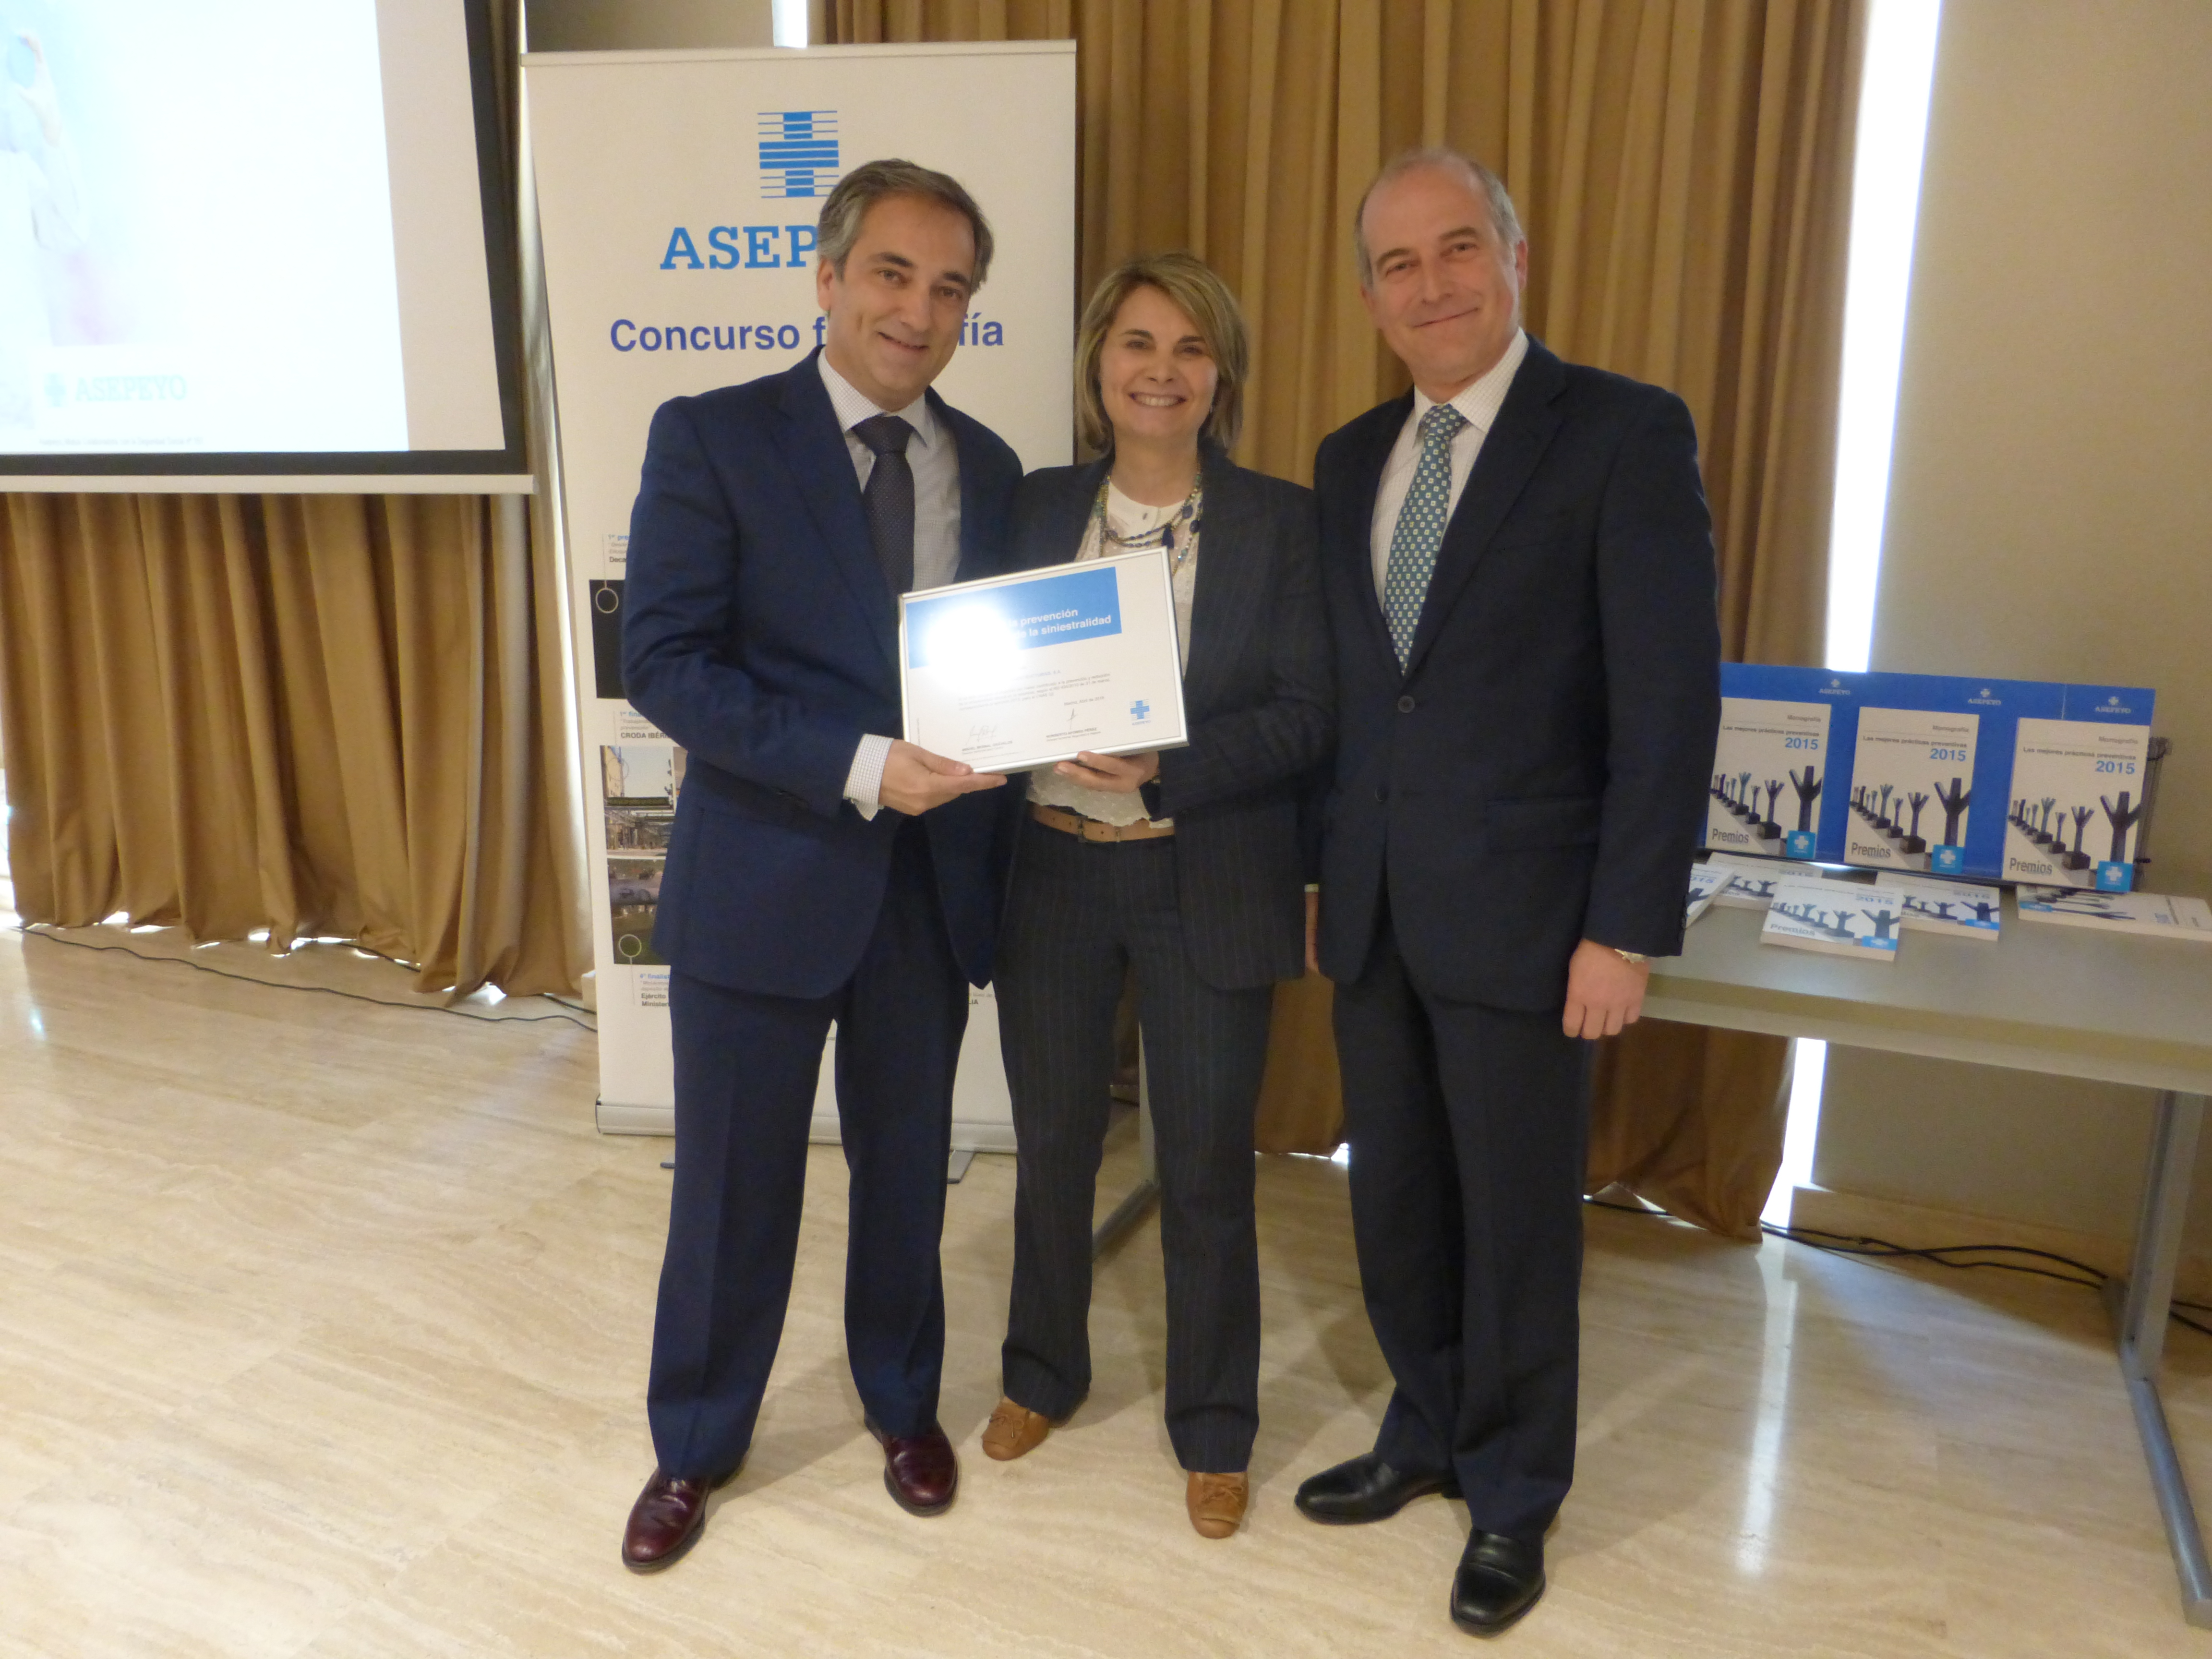 FCC Industrial is awarded for excellence in the management of prevention and reduction of accidents at work